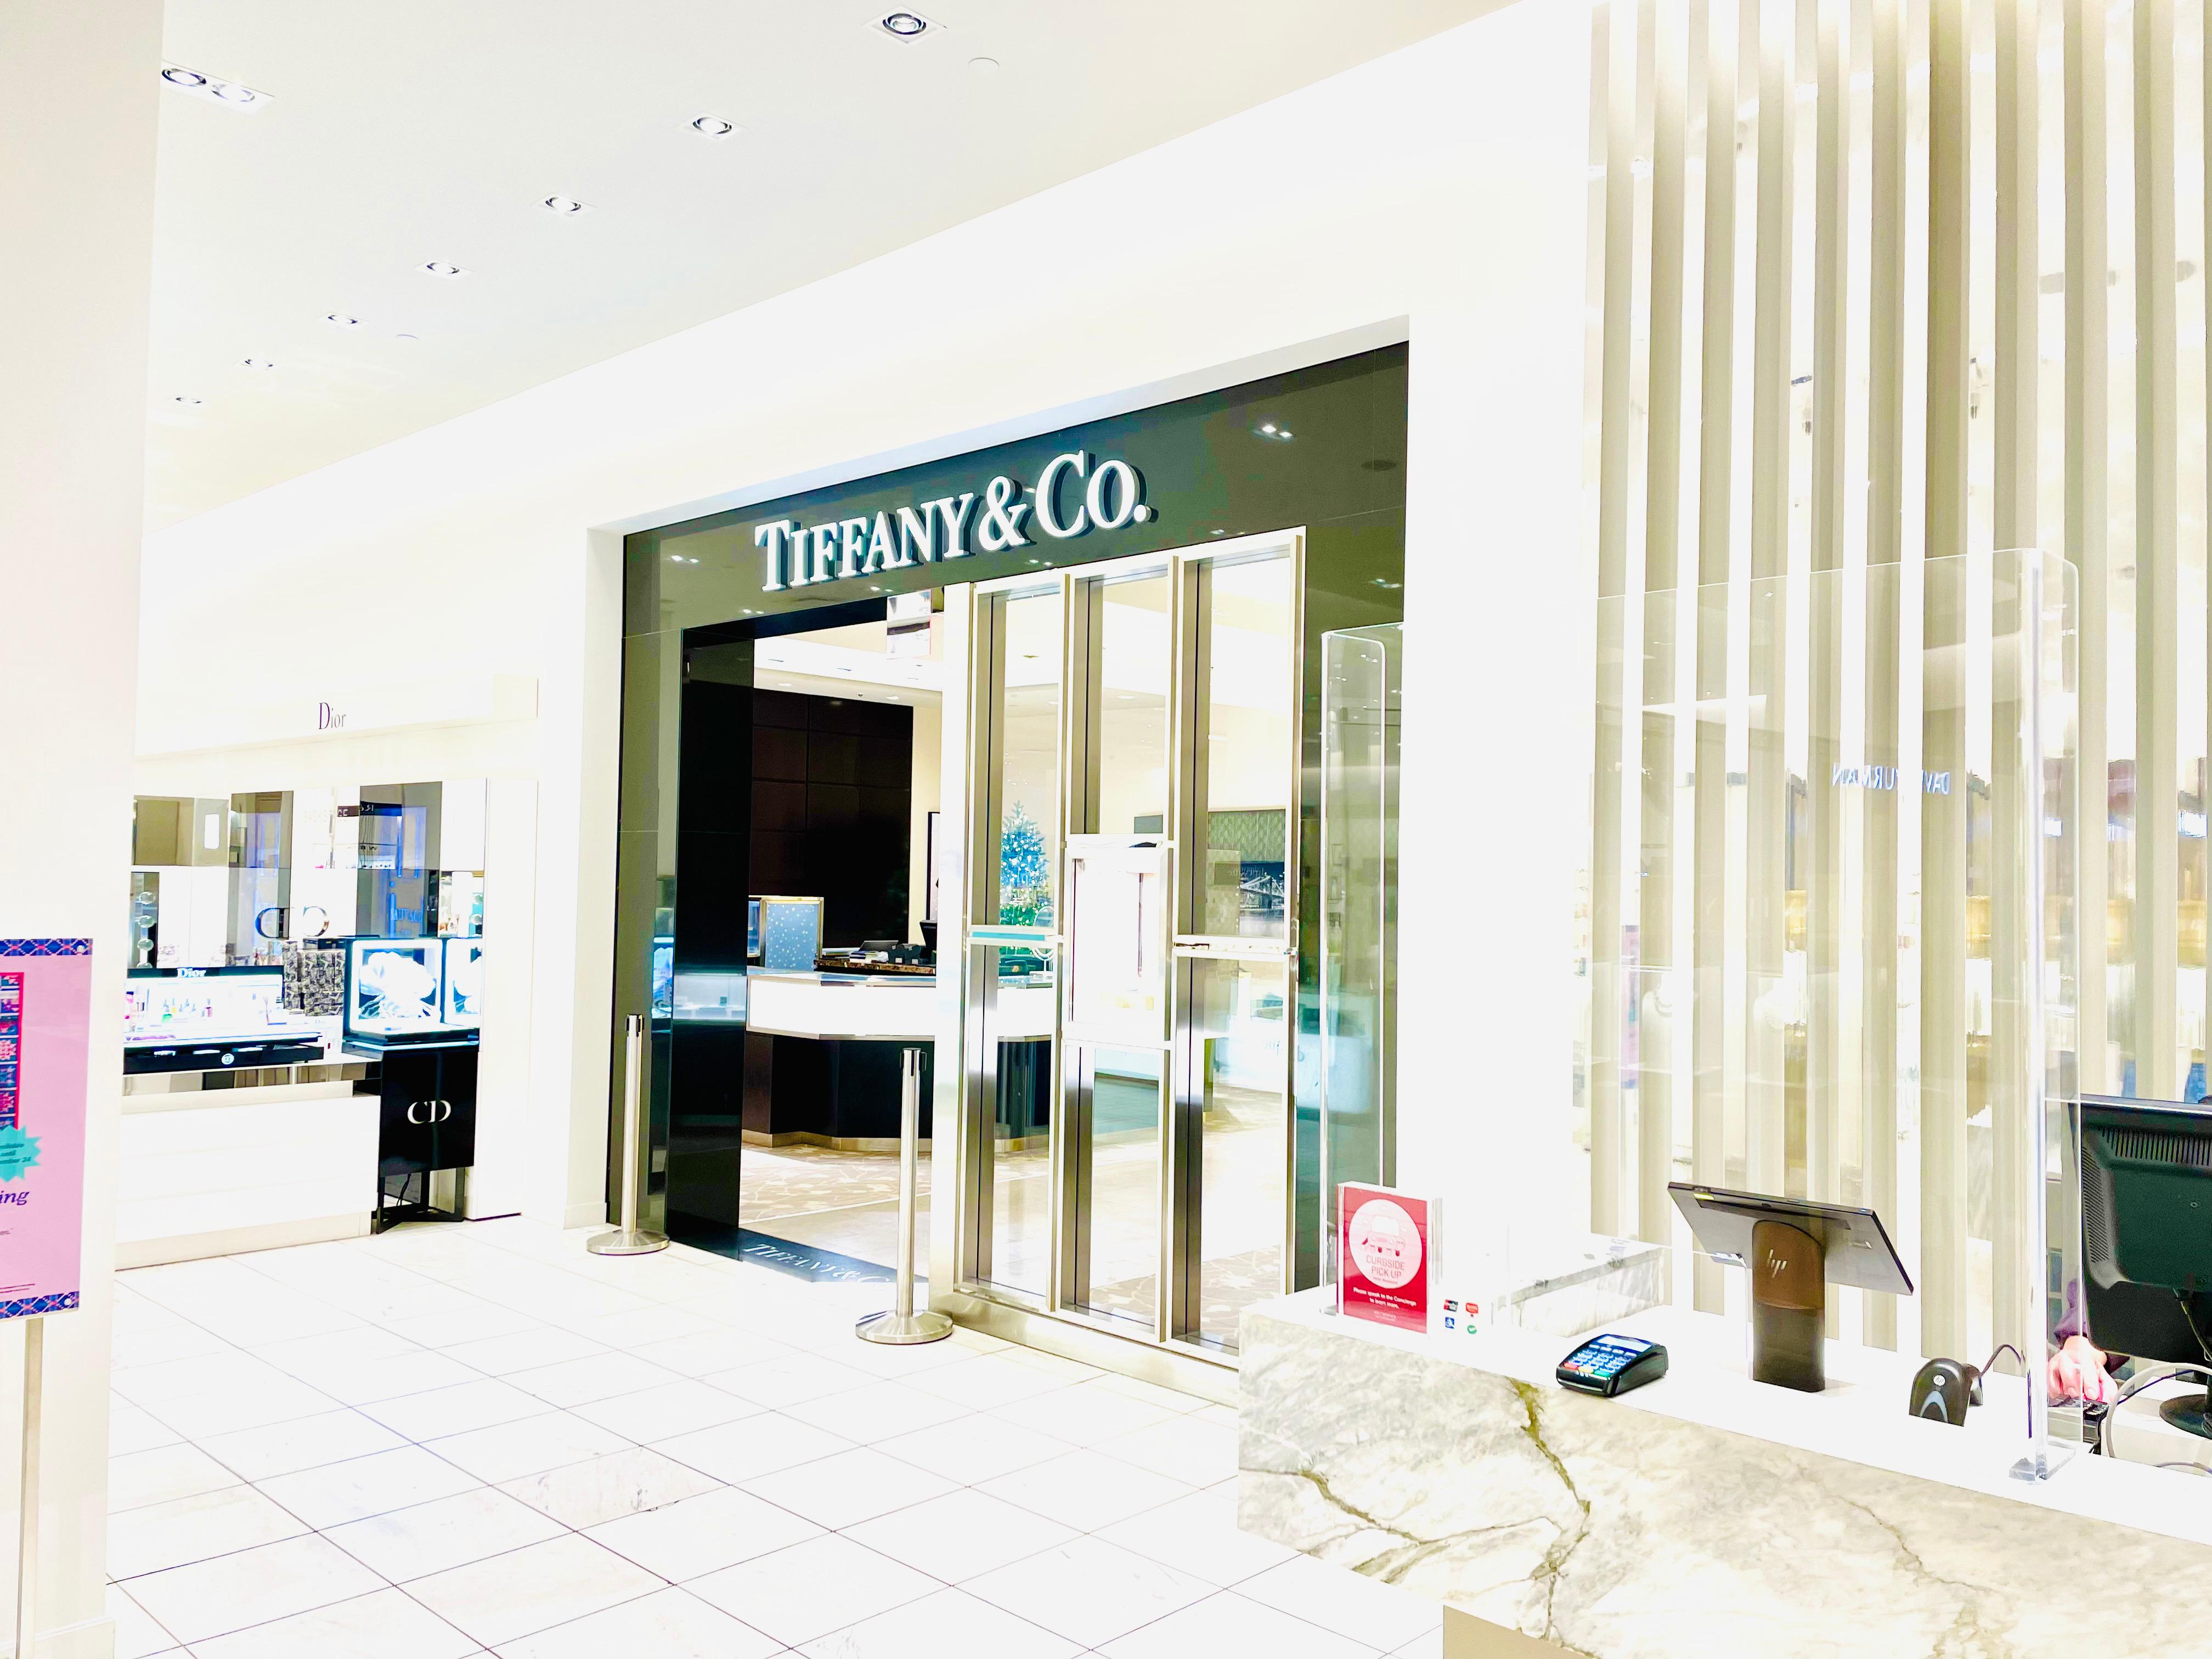 Images Tiffany & Co.